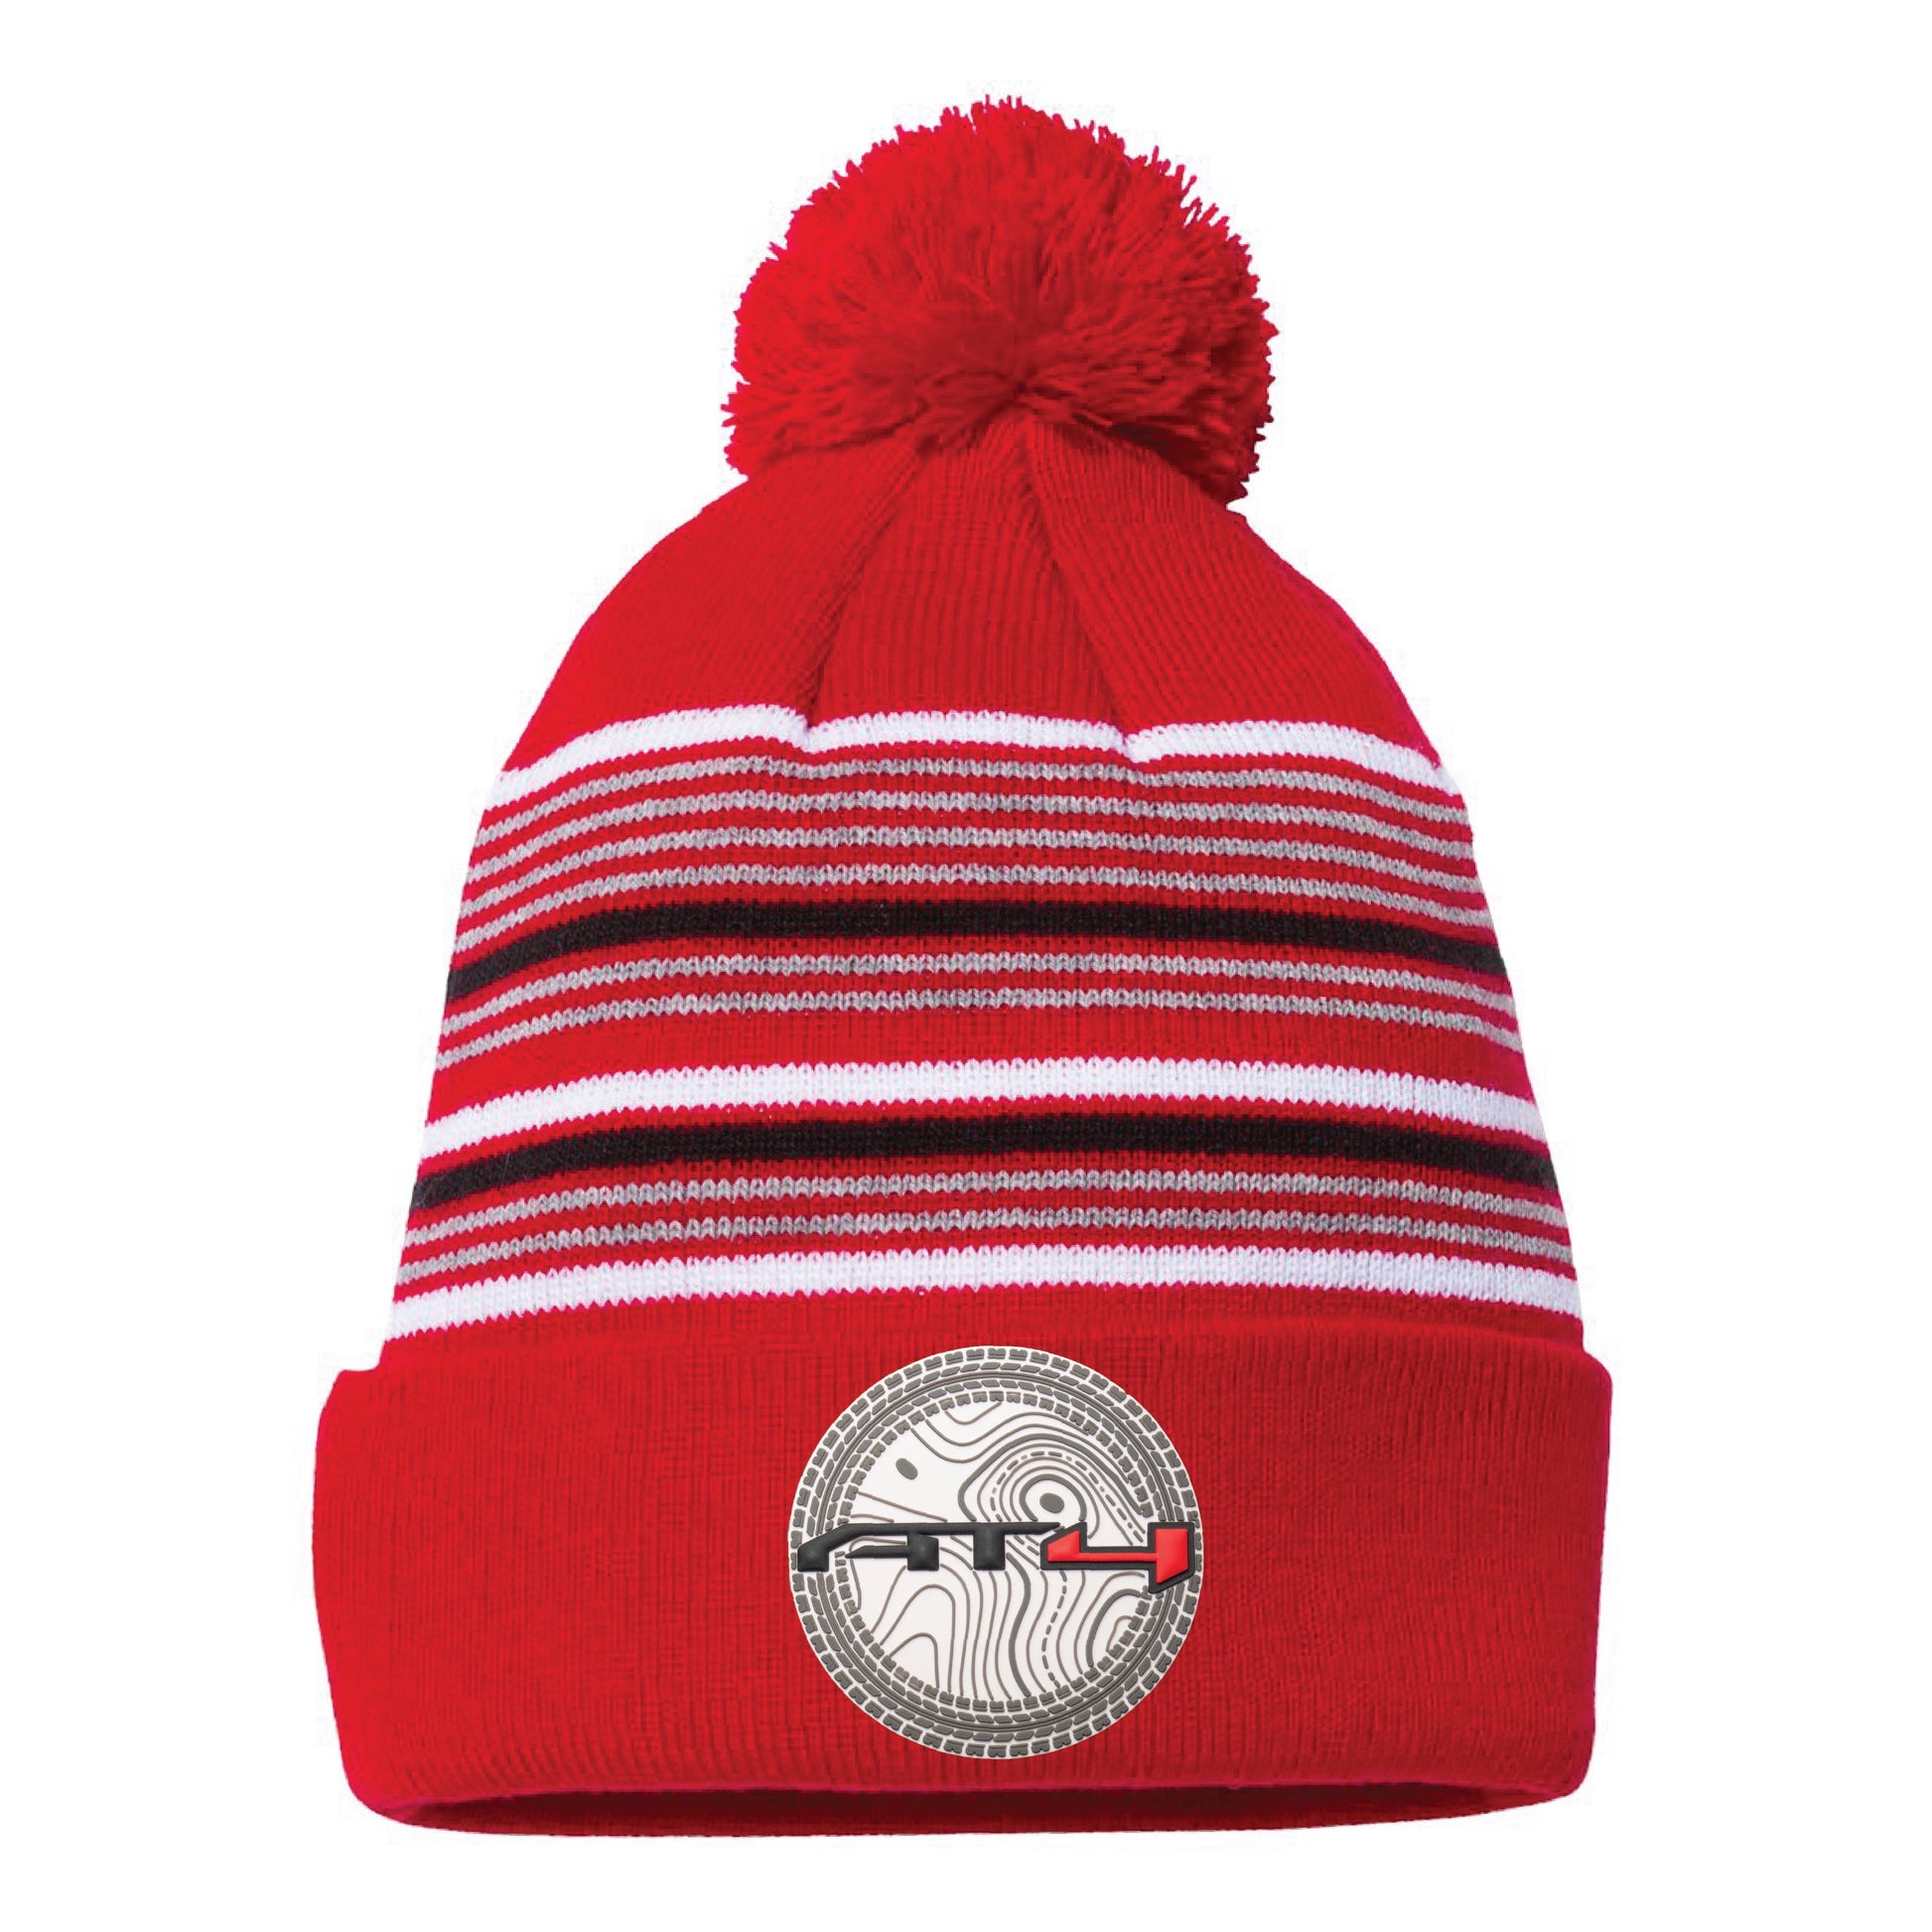 AT4 12 in Striped Knit Pom-Pom Top Beanie- Red/ White/ Grey/ Black - Ten Gallon Hat Co.